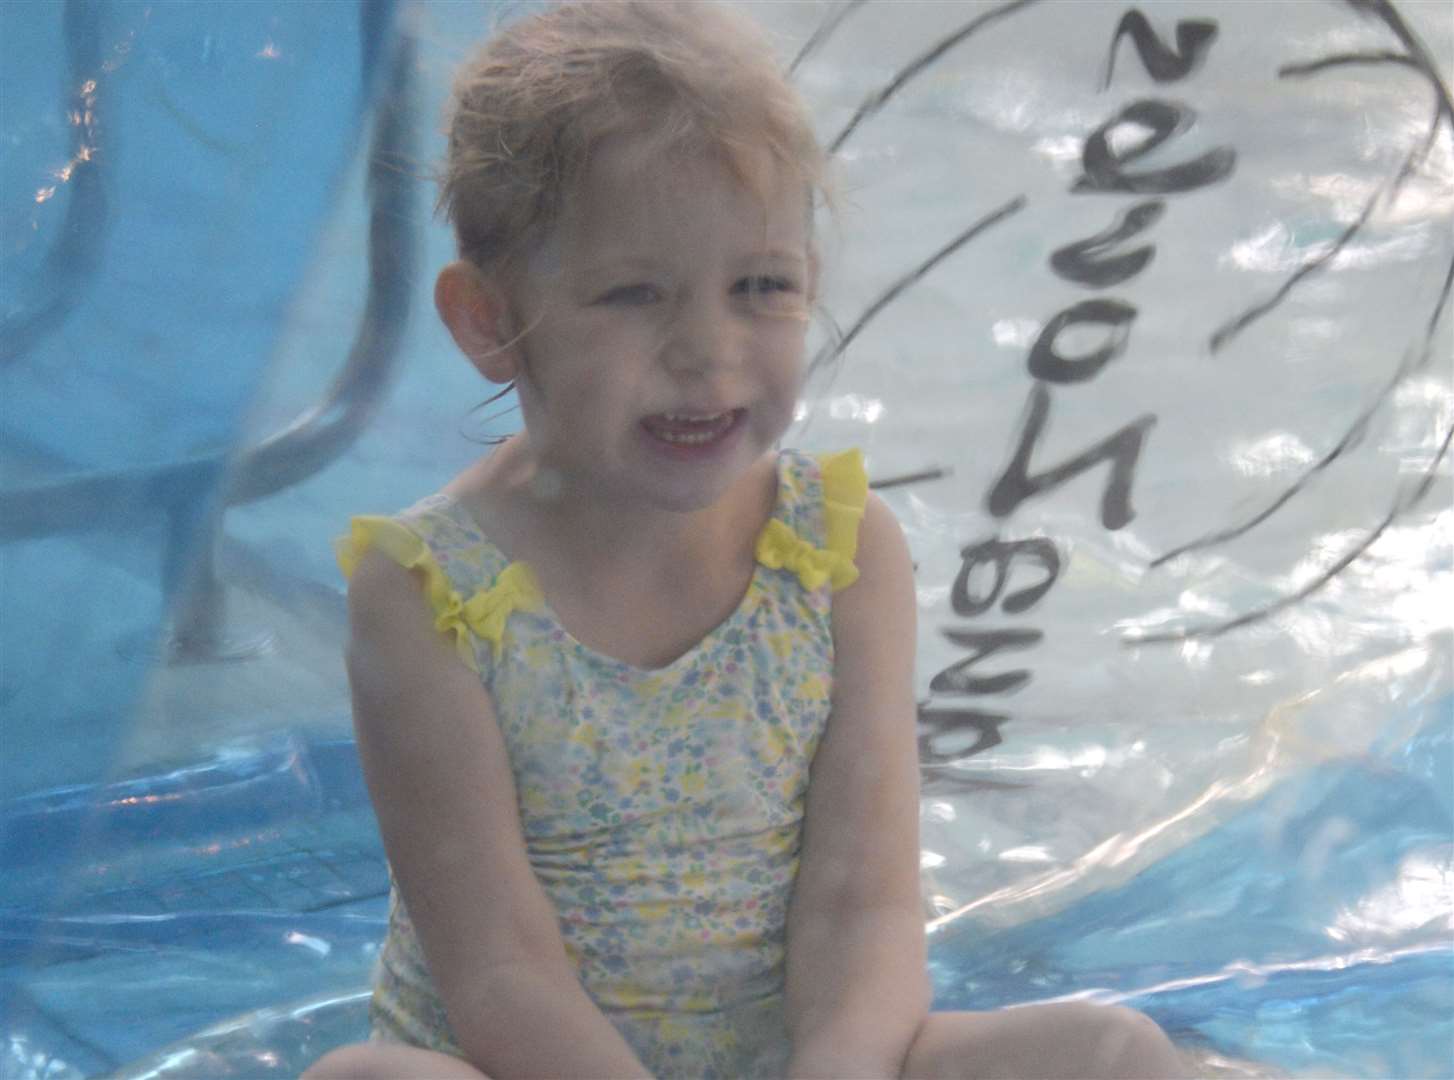 Josie Weed, 5, waits for the zorbing ball to fill with air